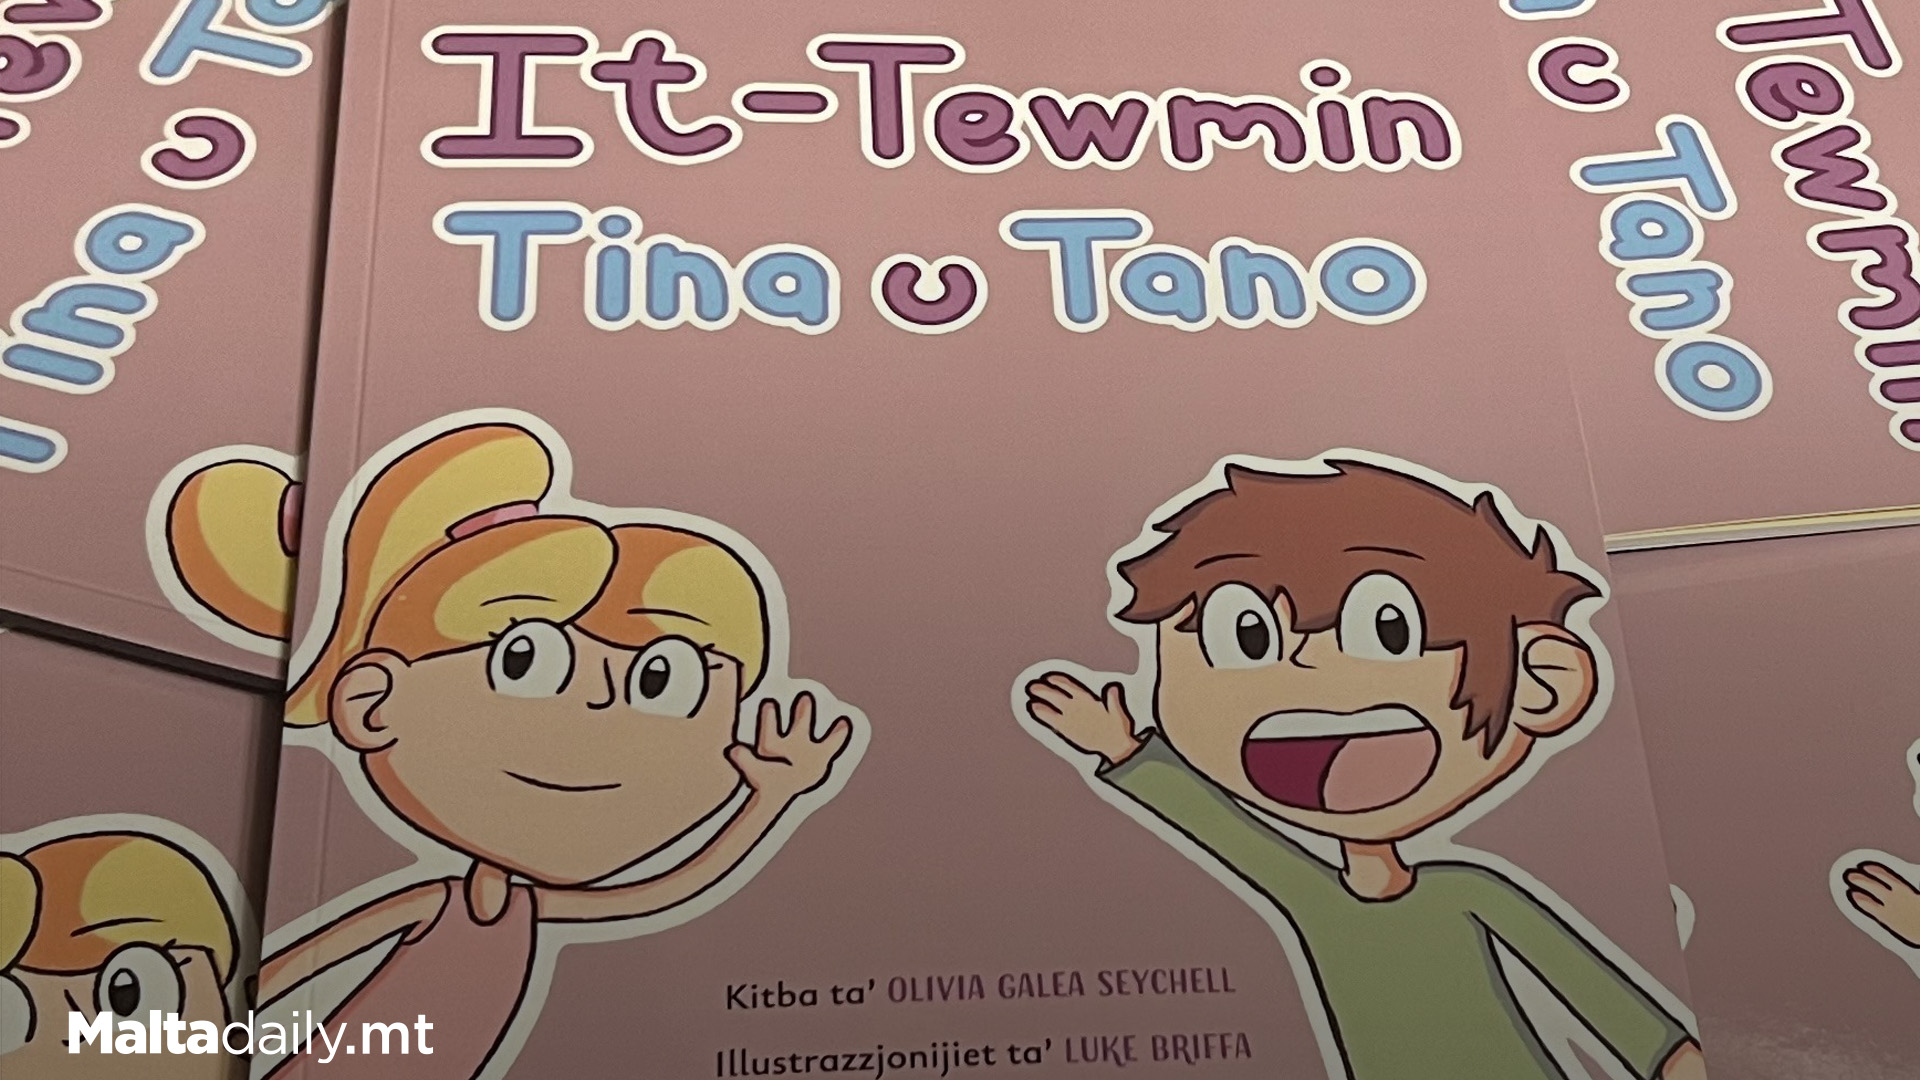 Twins Tina & Tano: New Book To Help Maltese Kids With Autism